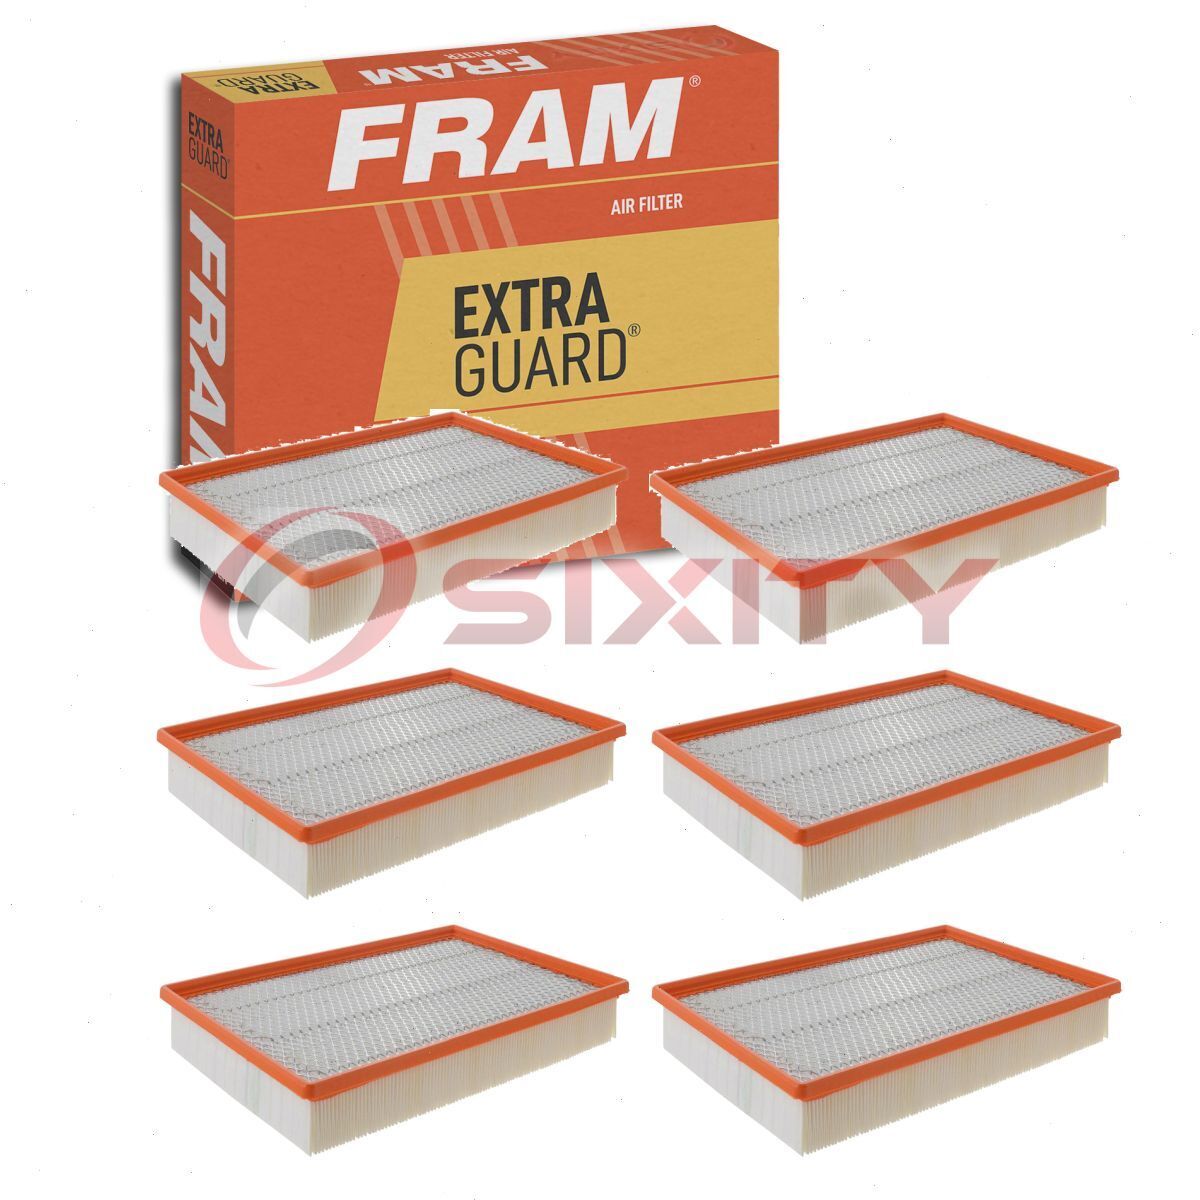 6 pc FRAM Extra Guard CA11960 Air Filters for PA99208 LX 2923 C32007 A969C nv